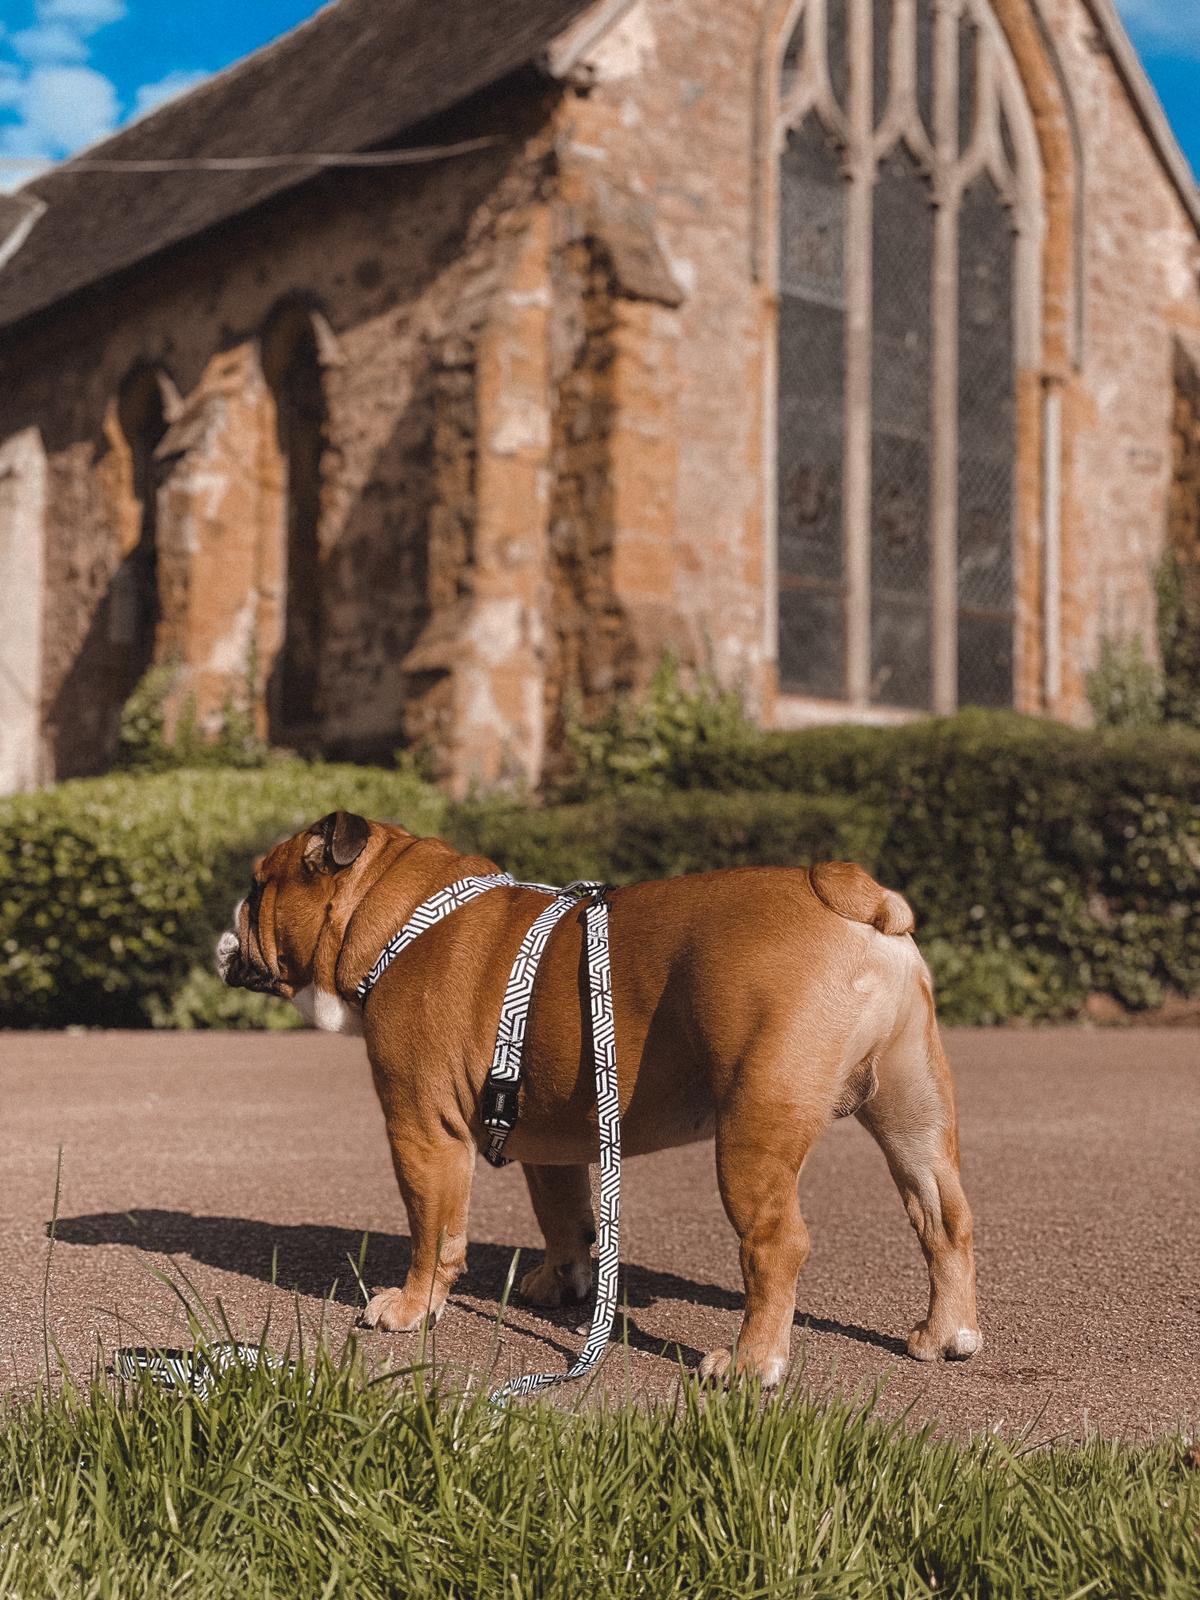 Bulldog wearing a TopDog Harnesses It's Just an Illusion Strap dog harness, the dog is standing on a path with a church behind 